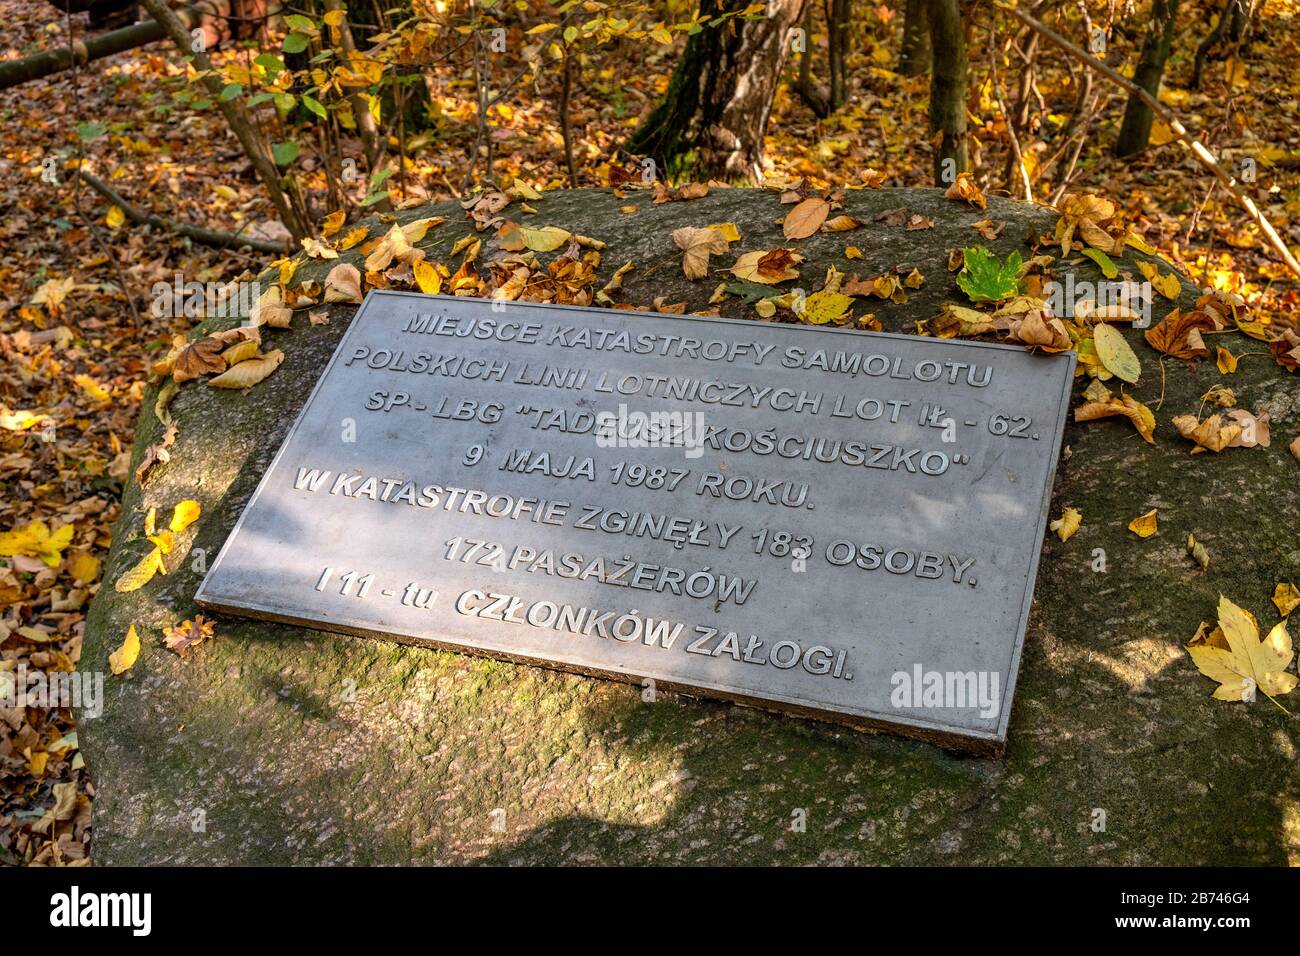 Warsaw, Mazovia / Poland - 2019/10/20: Aircraft flight 5055 crash memorial at the site of actual airplane crash of May 9, 1987 in Las Kabacki Forest Stock Photo